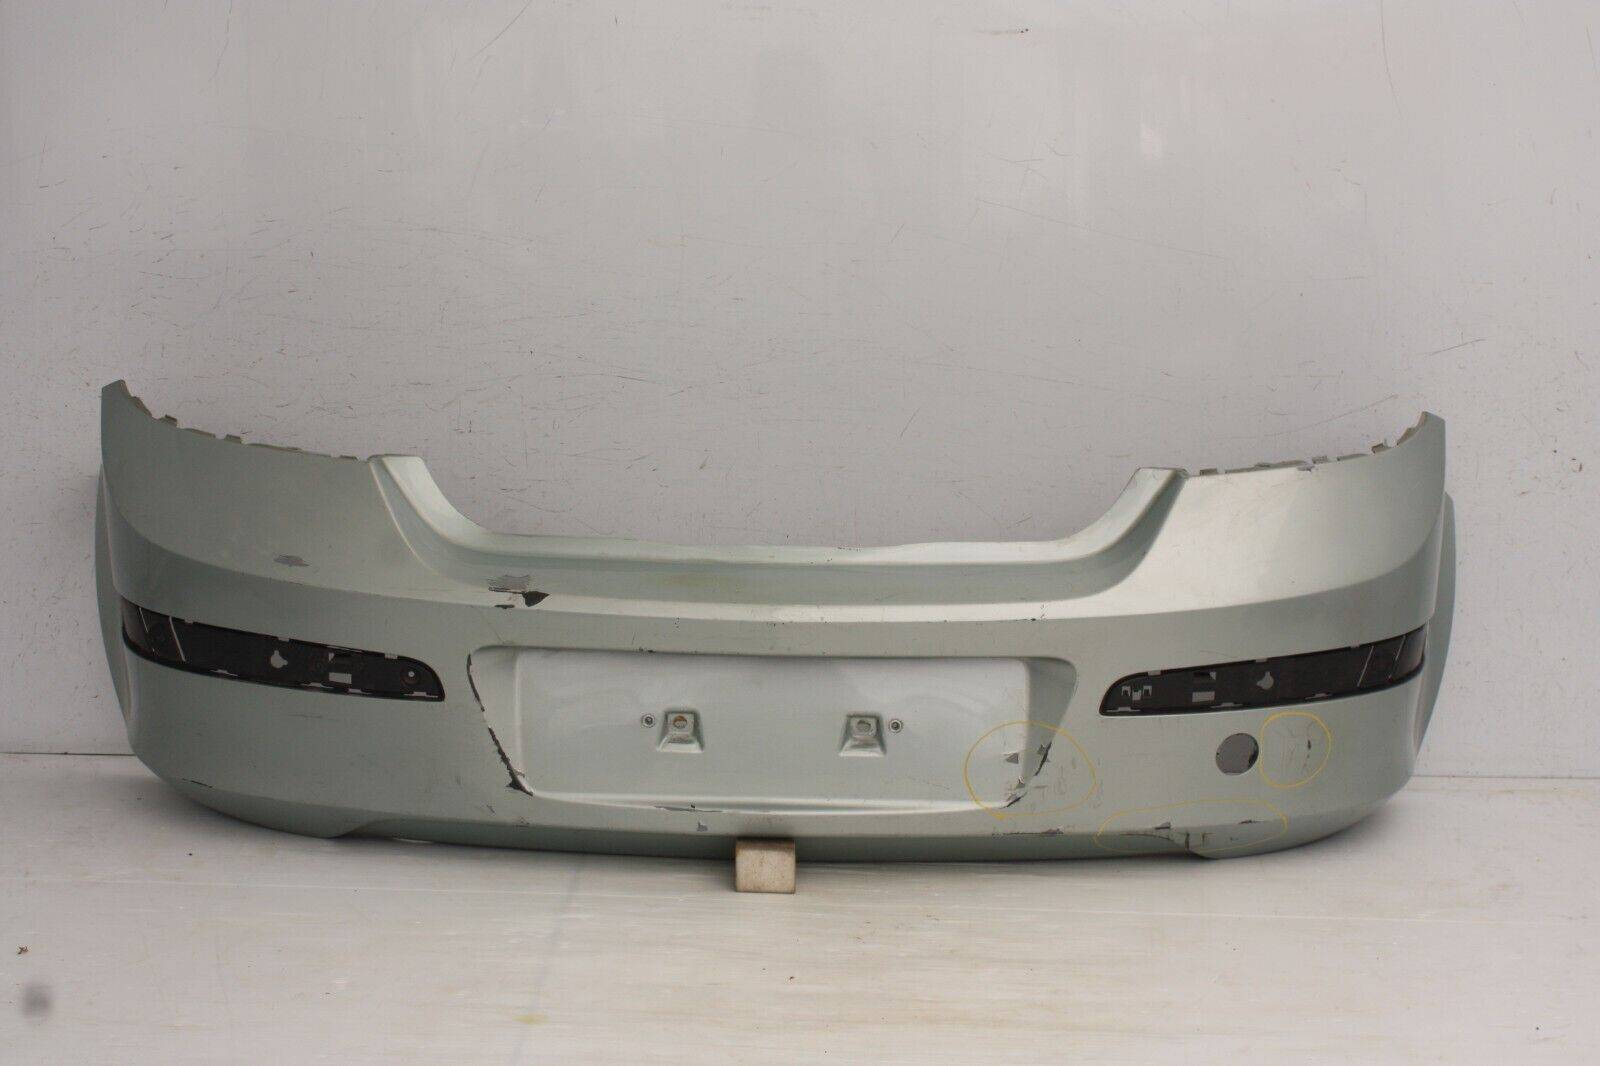 Vauxhall Astra H 5DR Rear Bumper 2004 TO 2009 24460353 Genuine 175623779959